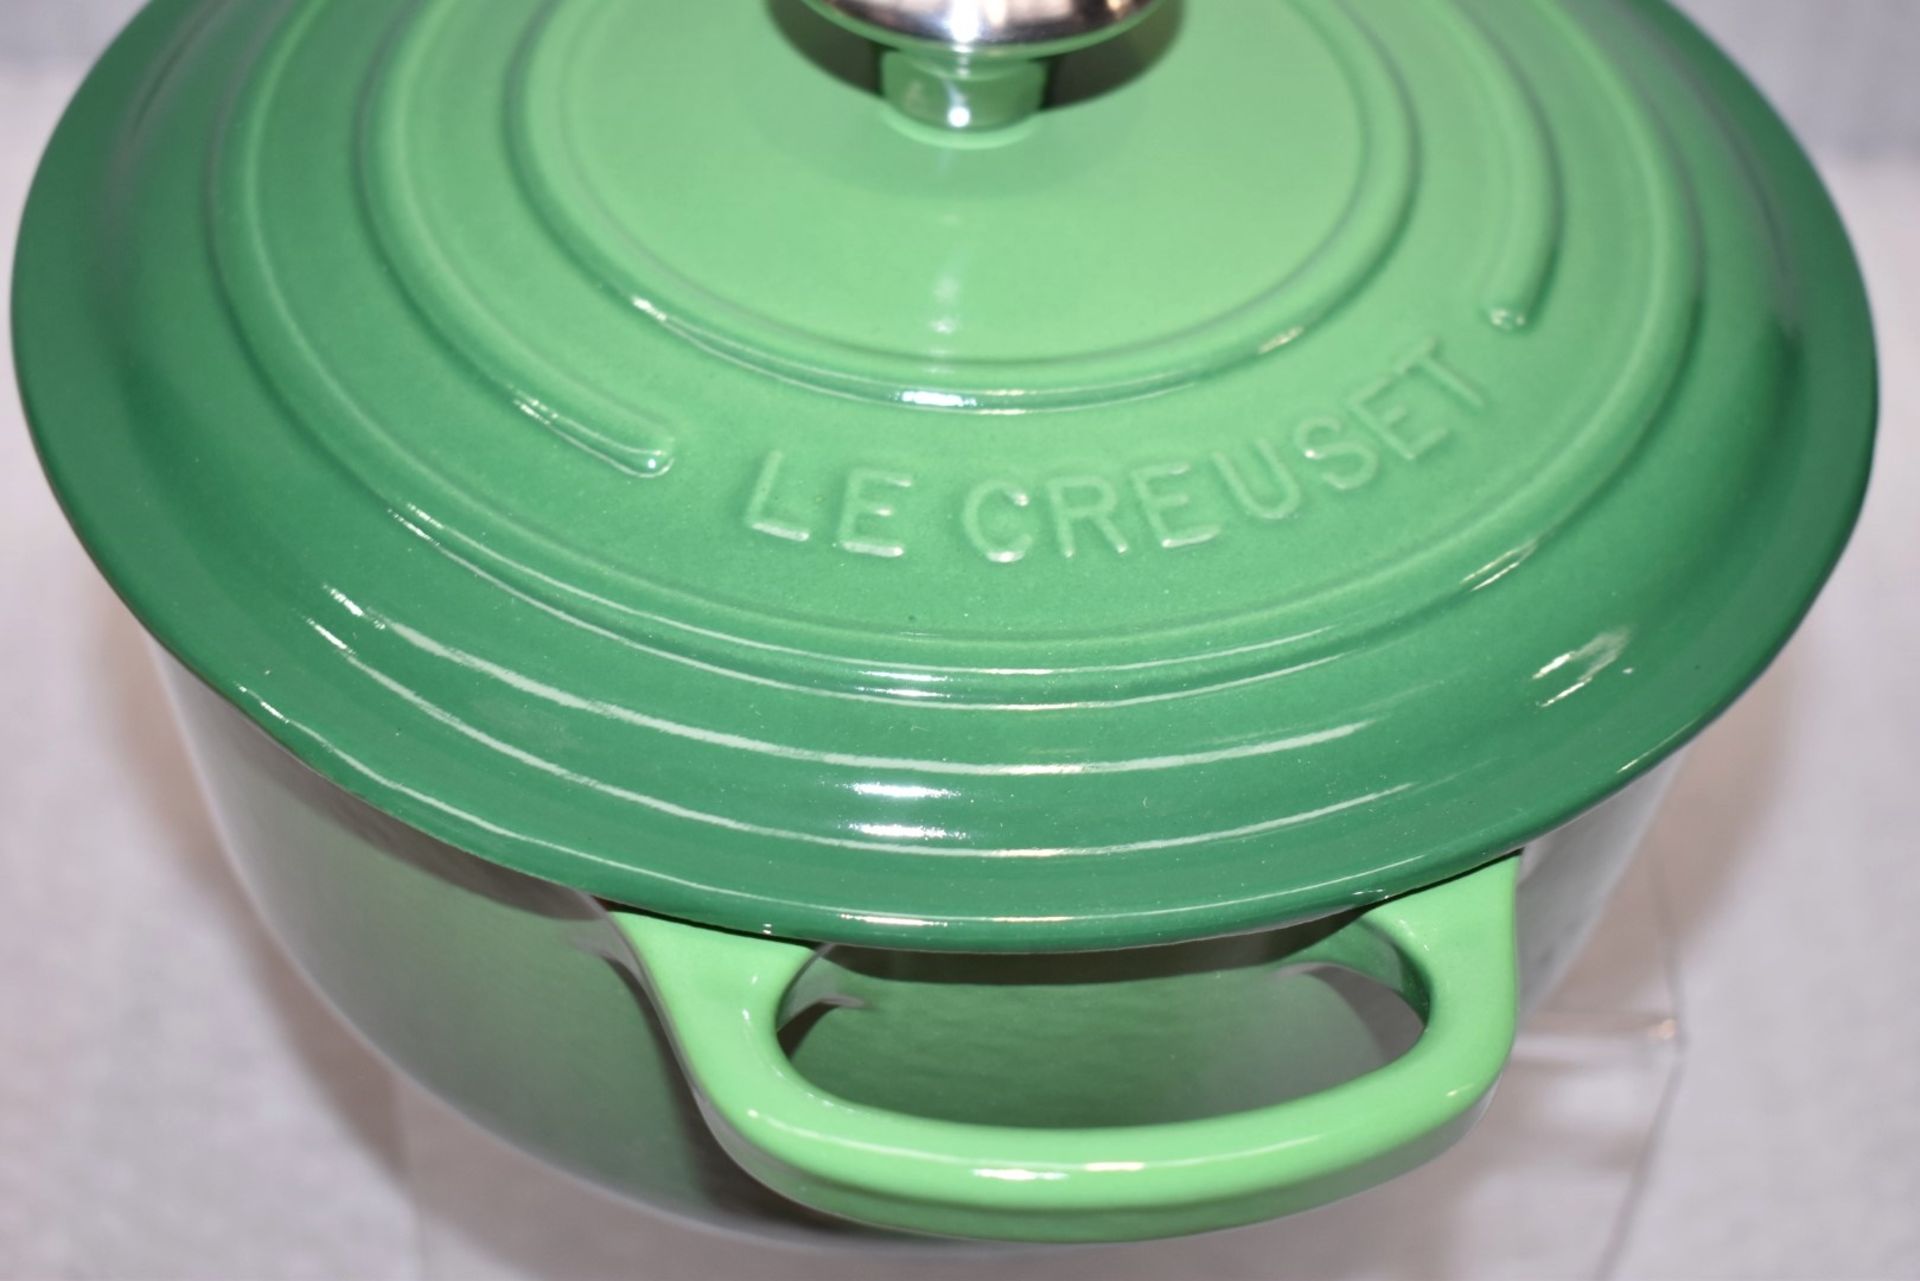 1 x LE CREUSET Enamelled Cast Iron Round Casserole Dish in Bamboo Green (20cm) - RRP £215.00 - Image 11 of 16